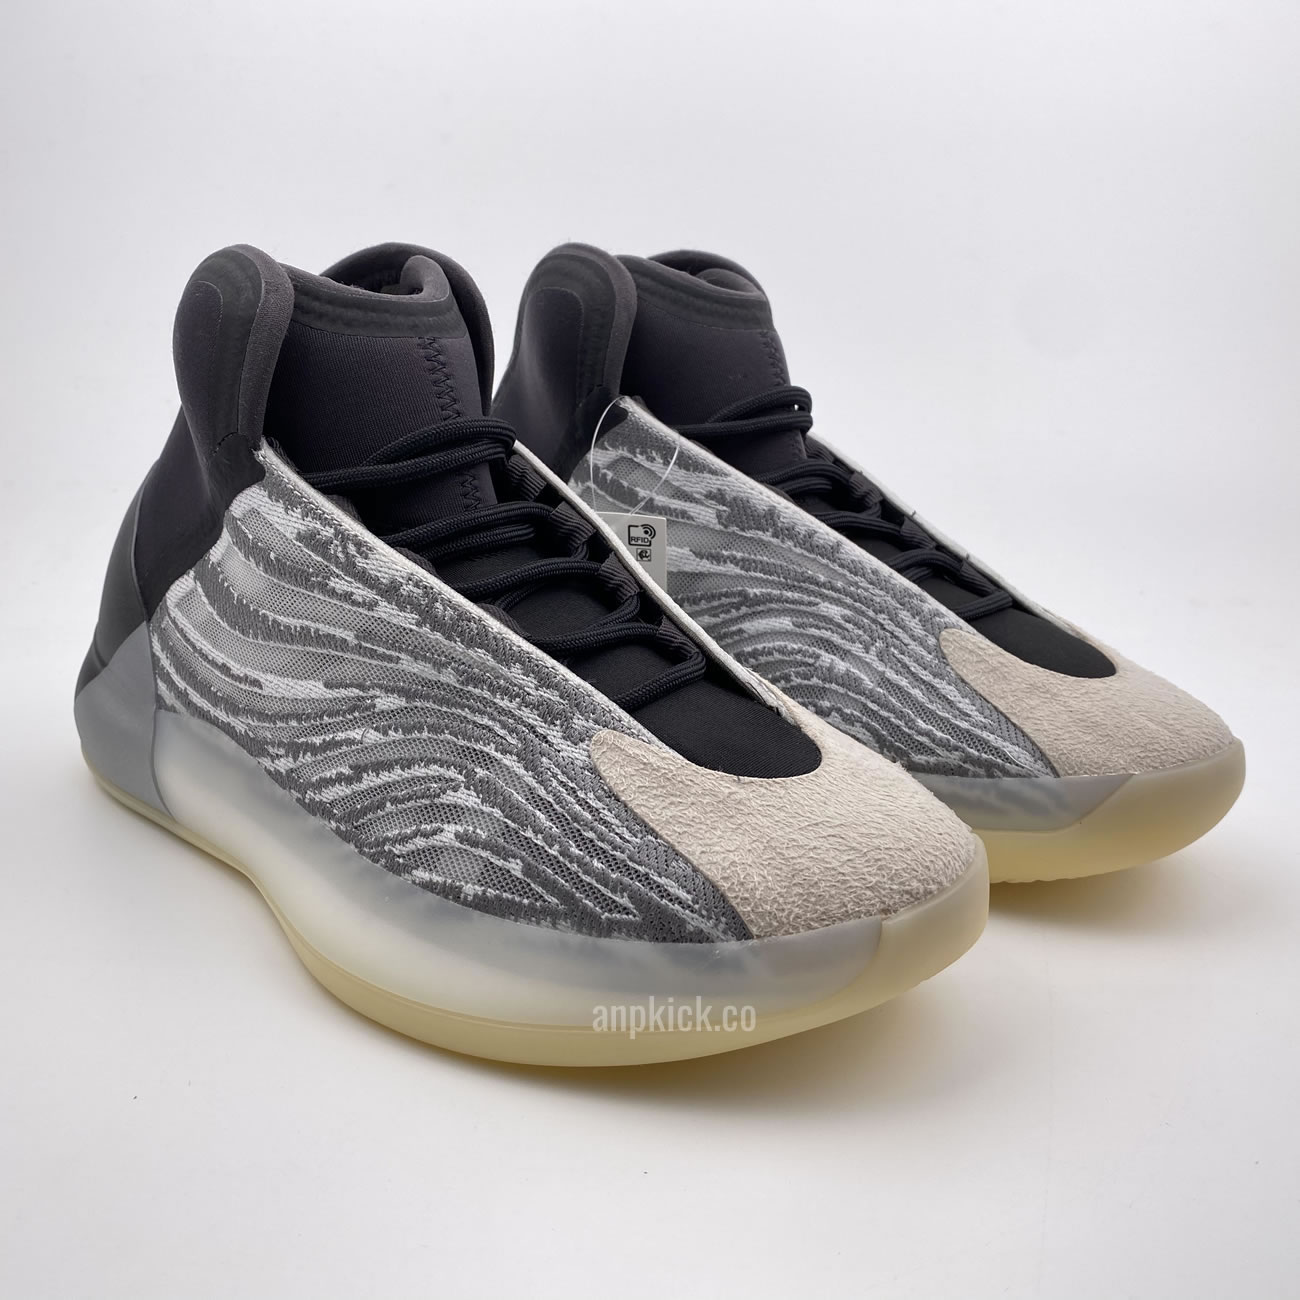 Adidas Yeezy Basketball Quantum Boost For Sale New Release Eg1535 (4) - newkick.org